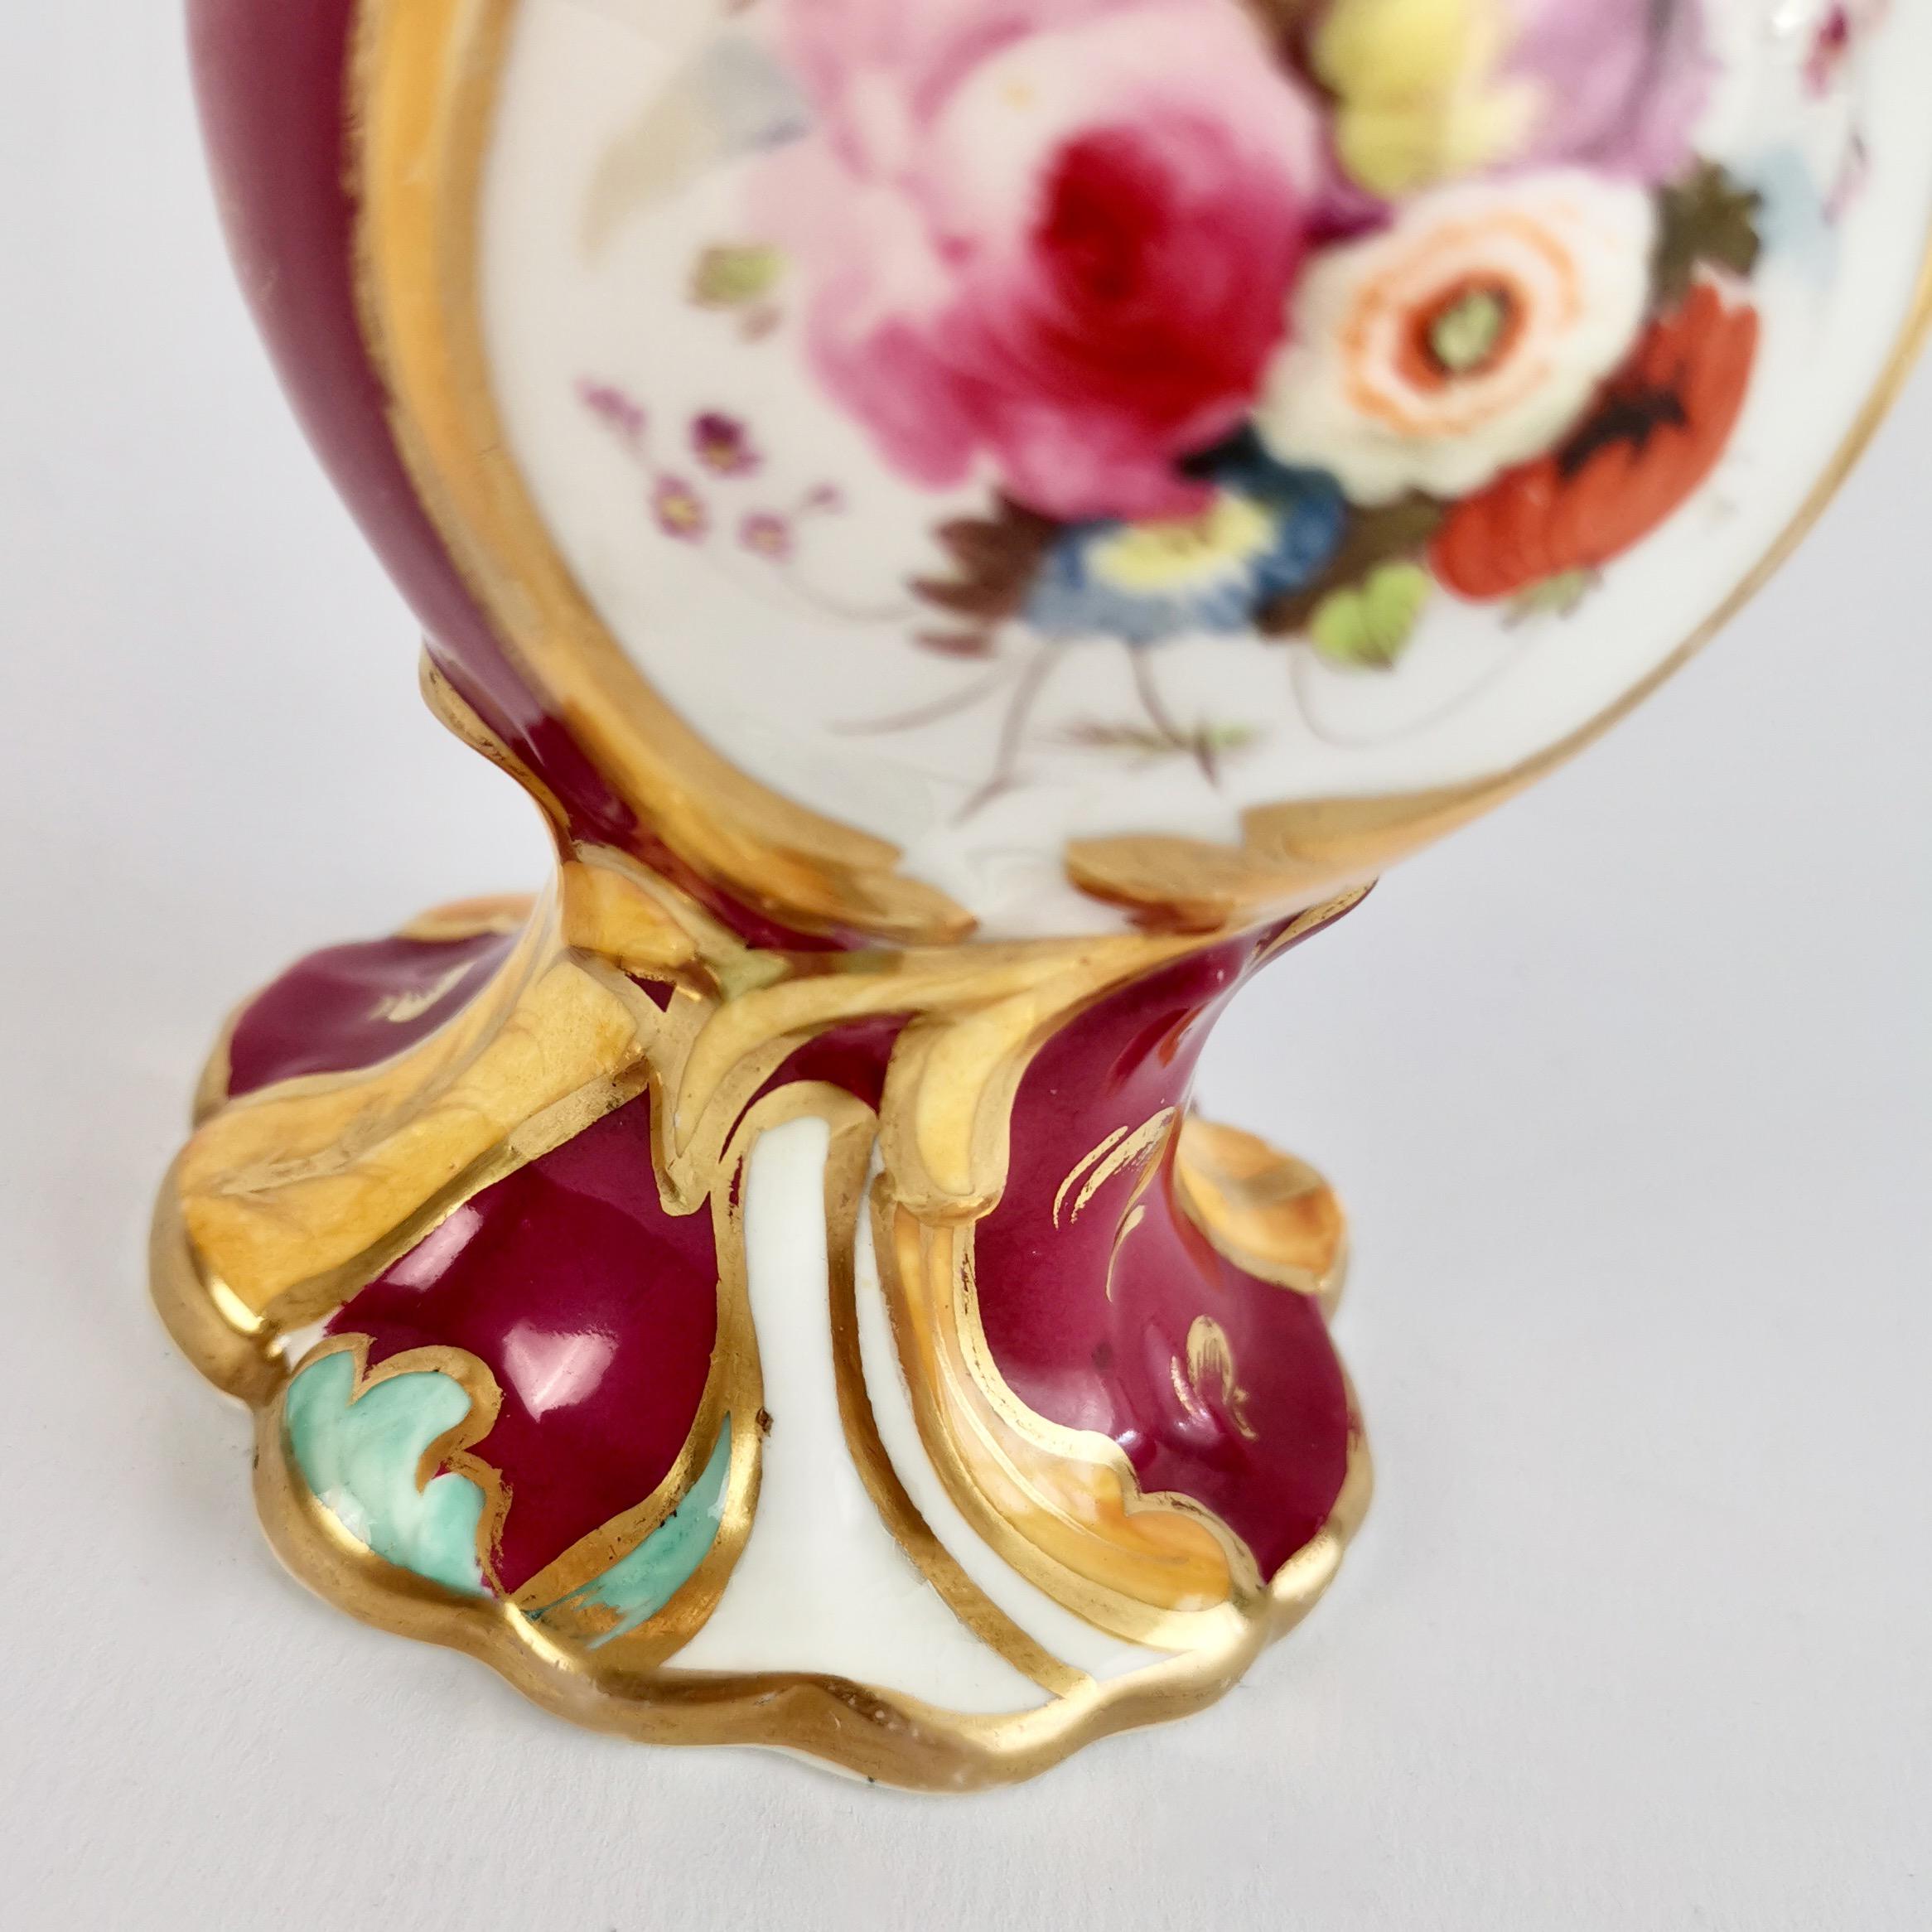 Samuel Alcock Small Porcelain Vase, Maroon with Flowers, Rococo Revival 1